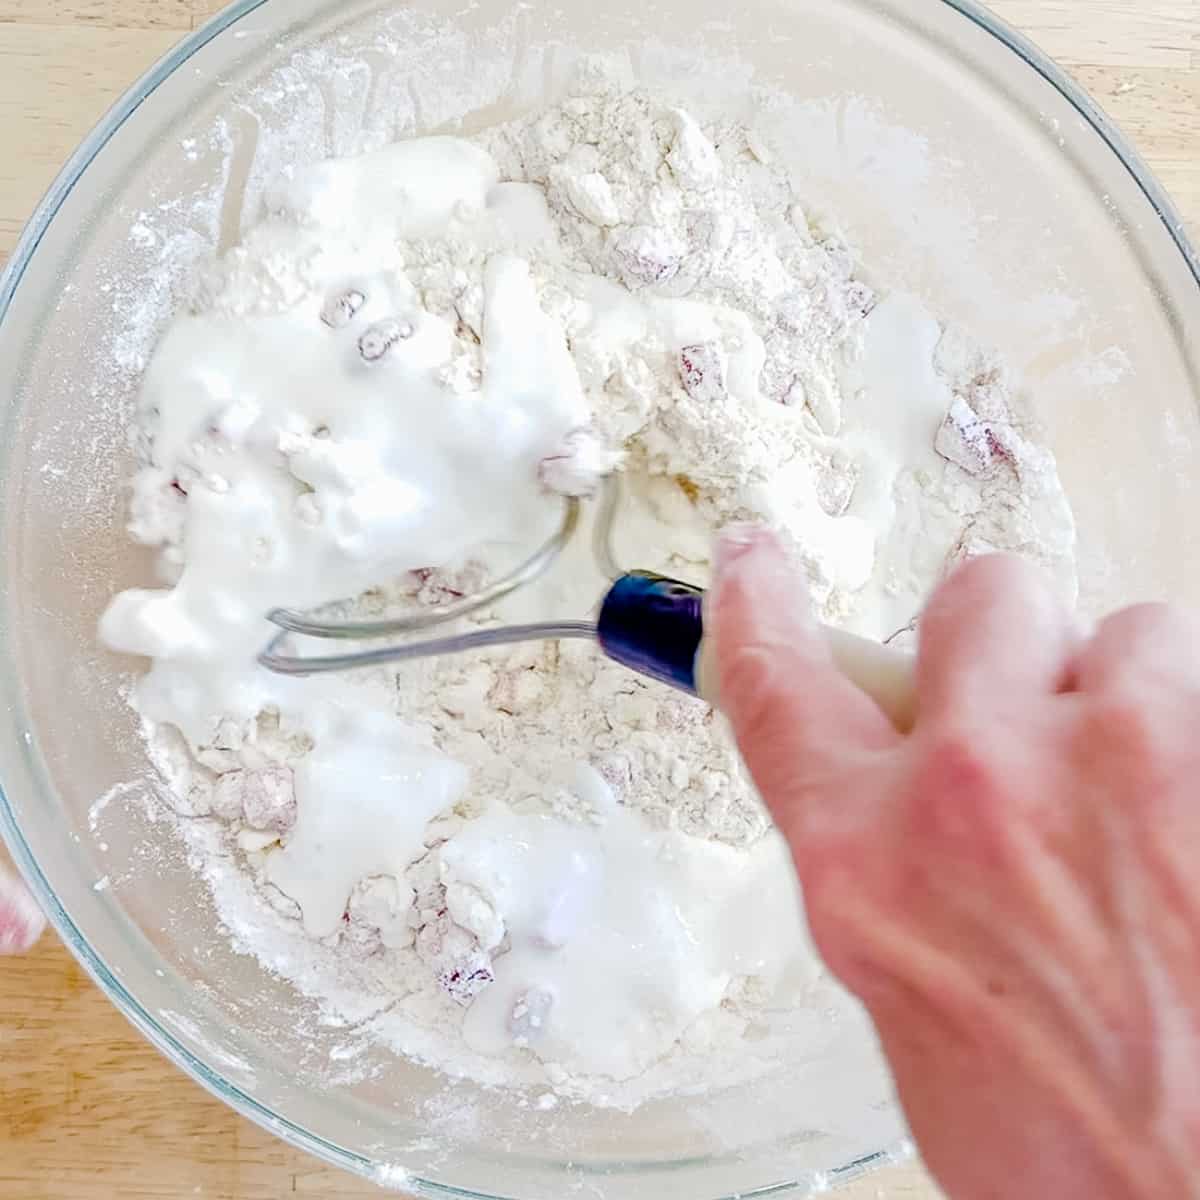 mixing buttermilk into strawberry biscuit ingredients.